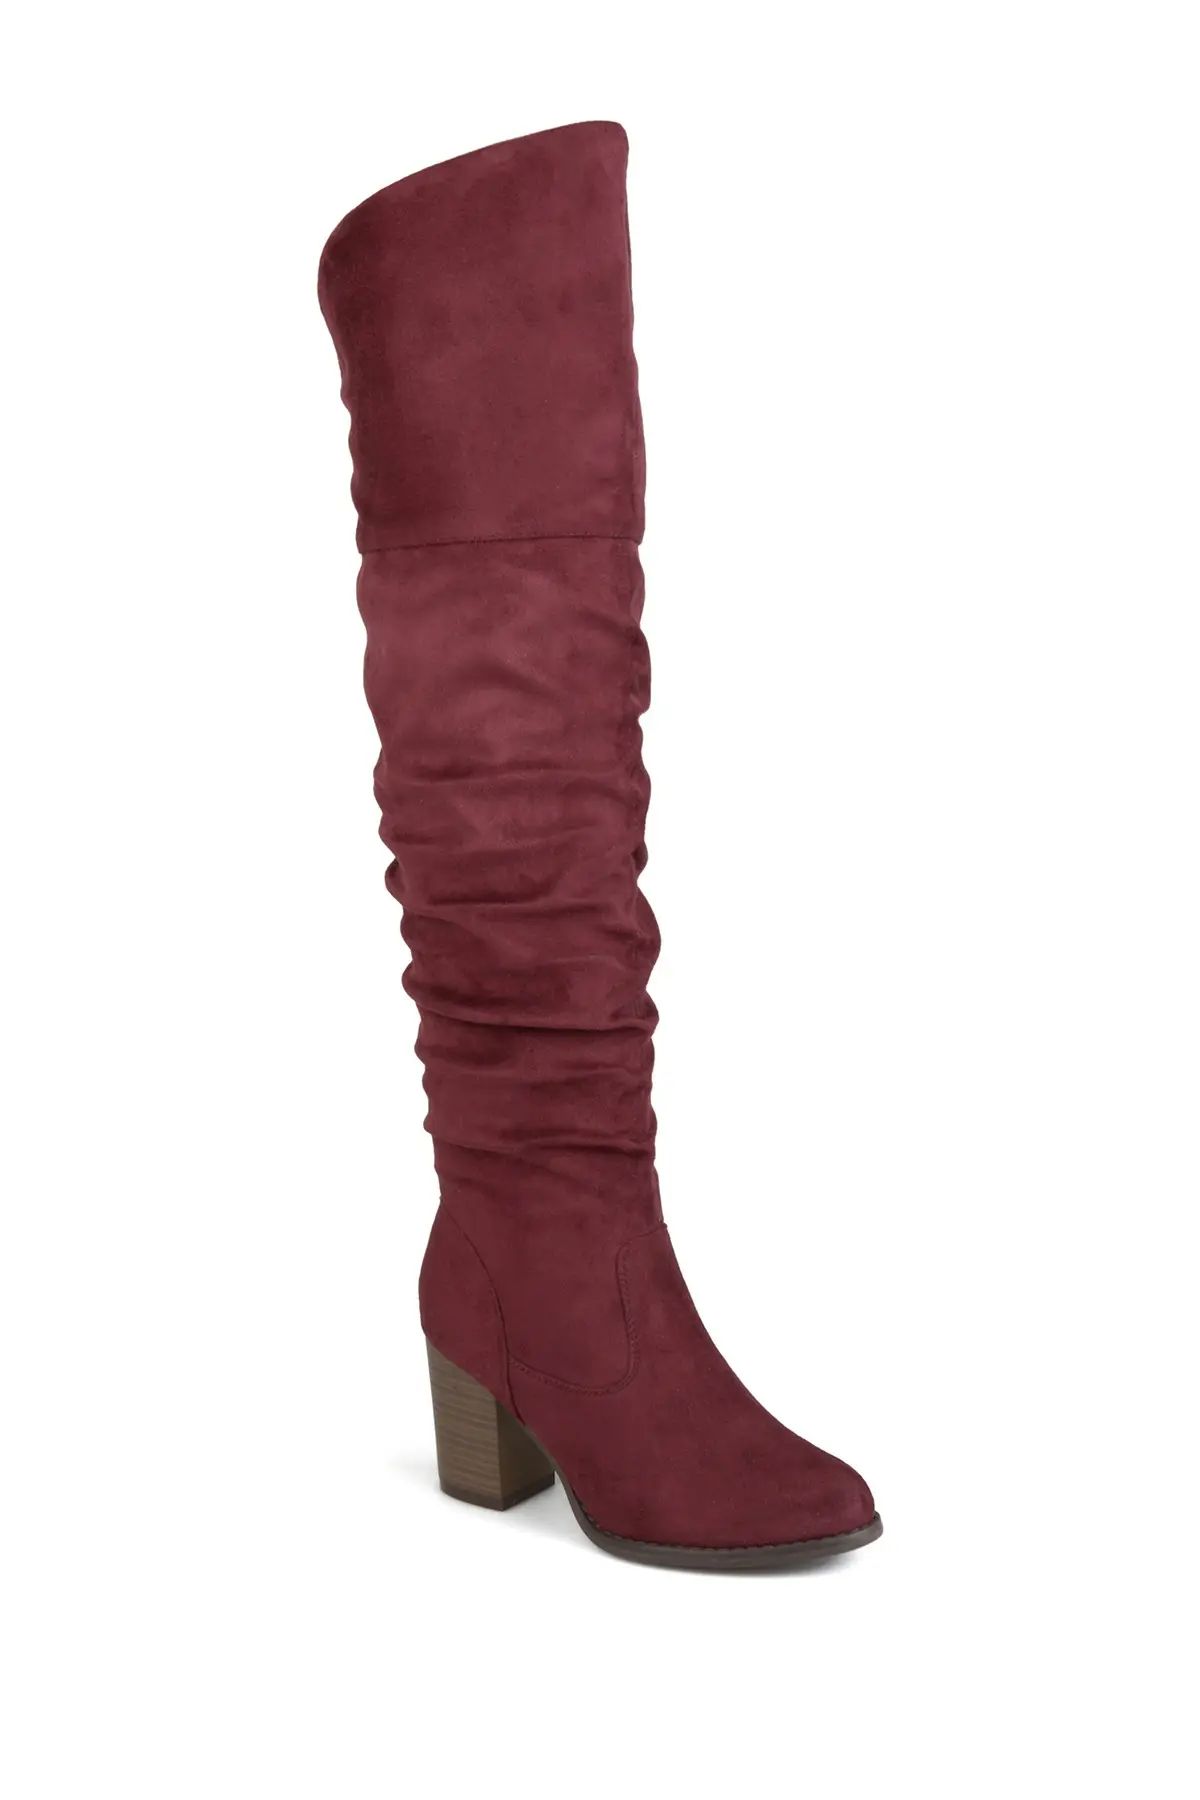 JOURNEE Collection Kaison Ruched Tall Boot - Extra Wide Calf at Nordstrom Rack | Nordstrom Rack